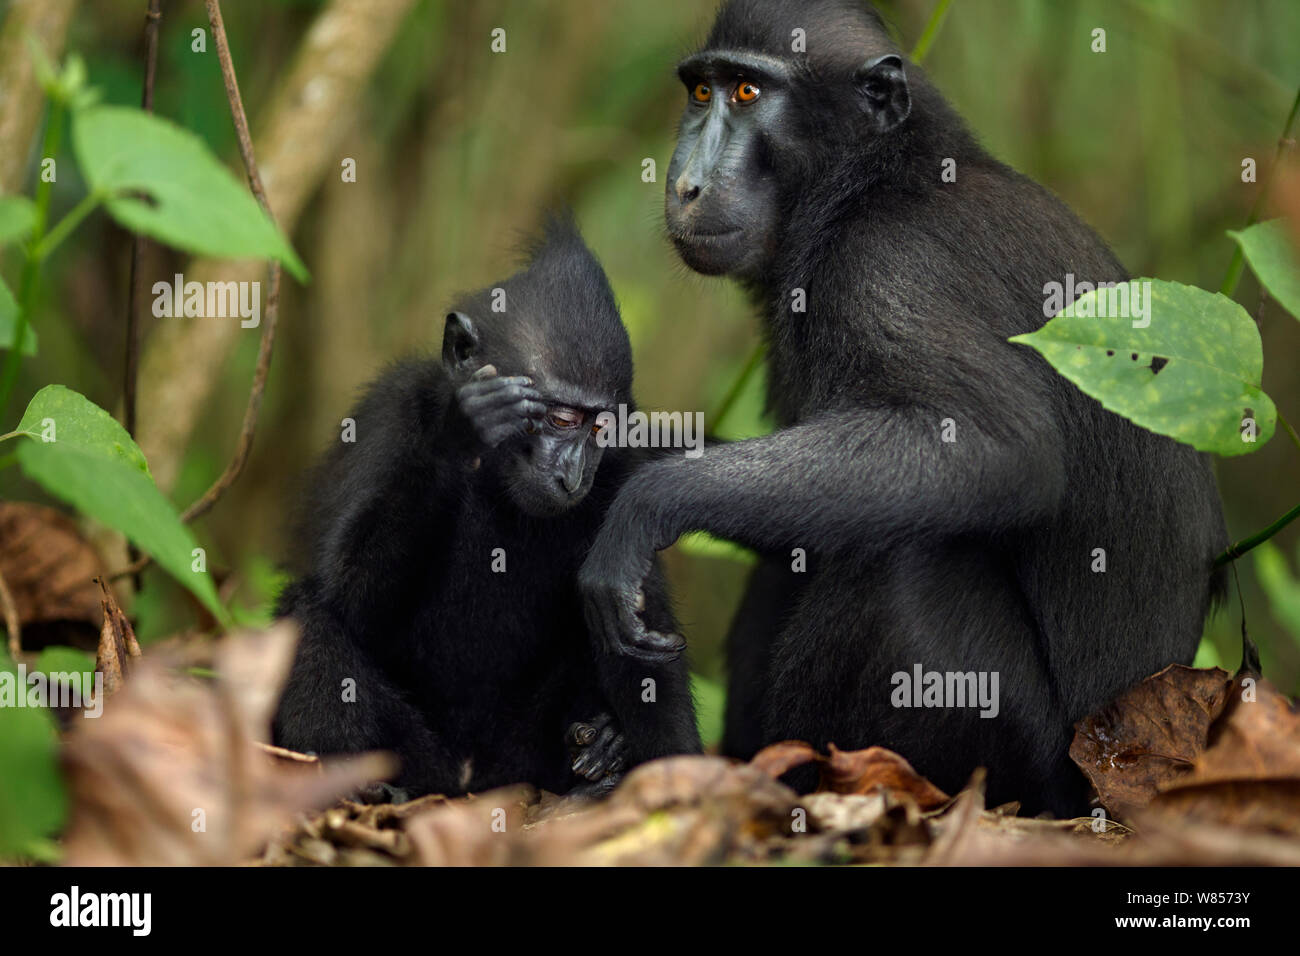 Celebes / Black crested macaque (Macaca nigra)  female grooming an infant, Tangkoko National Park, Sulawesi, Indonesia. Stock Photo